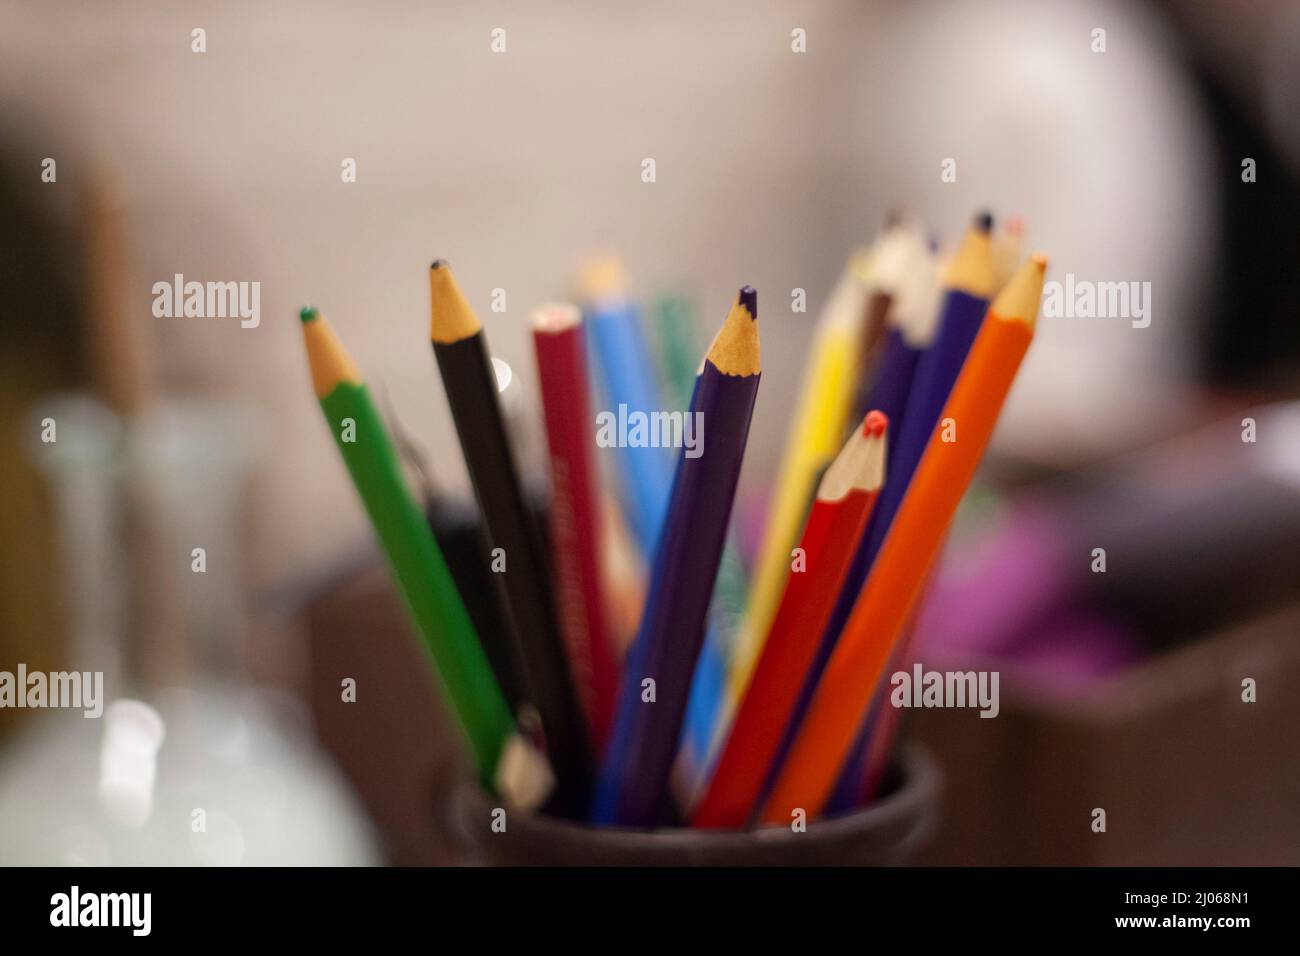 Pencils of different colors. Drawing kit. Purple and red acrylic pencil stands in jar. Background details of artist's work. Stock Photo